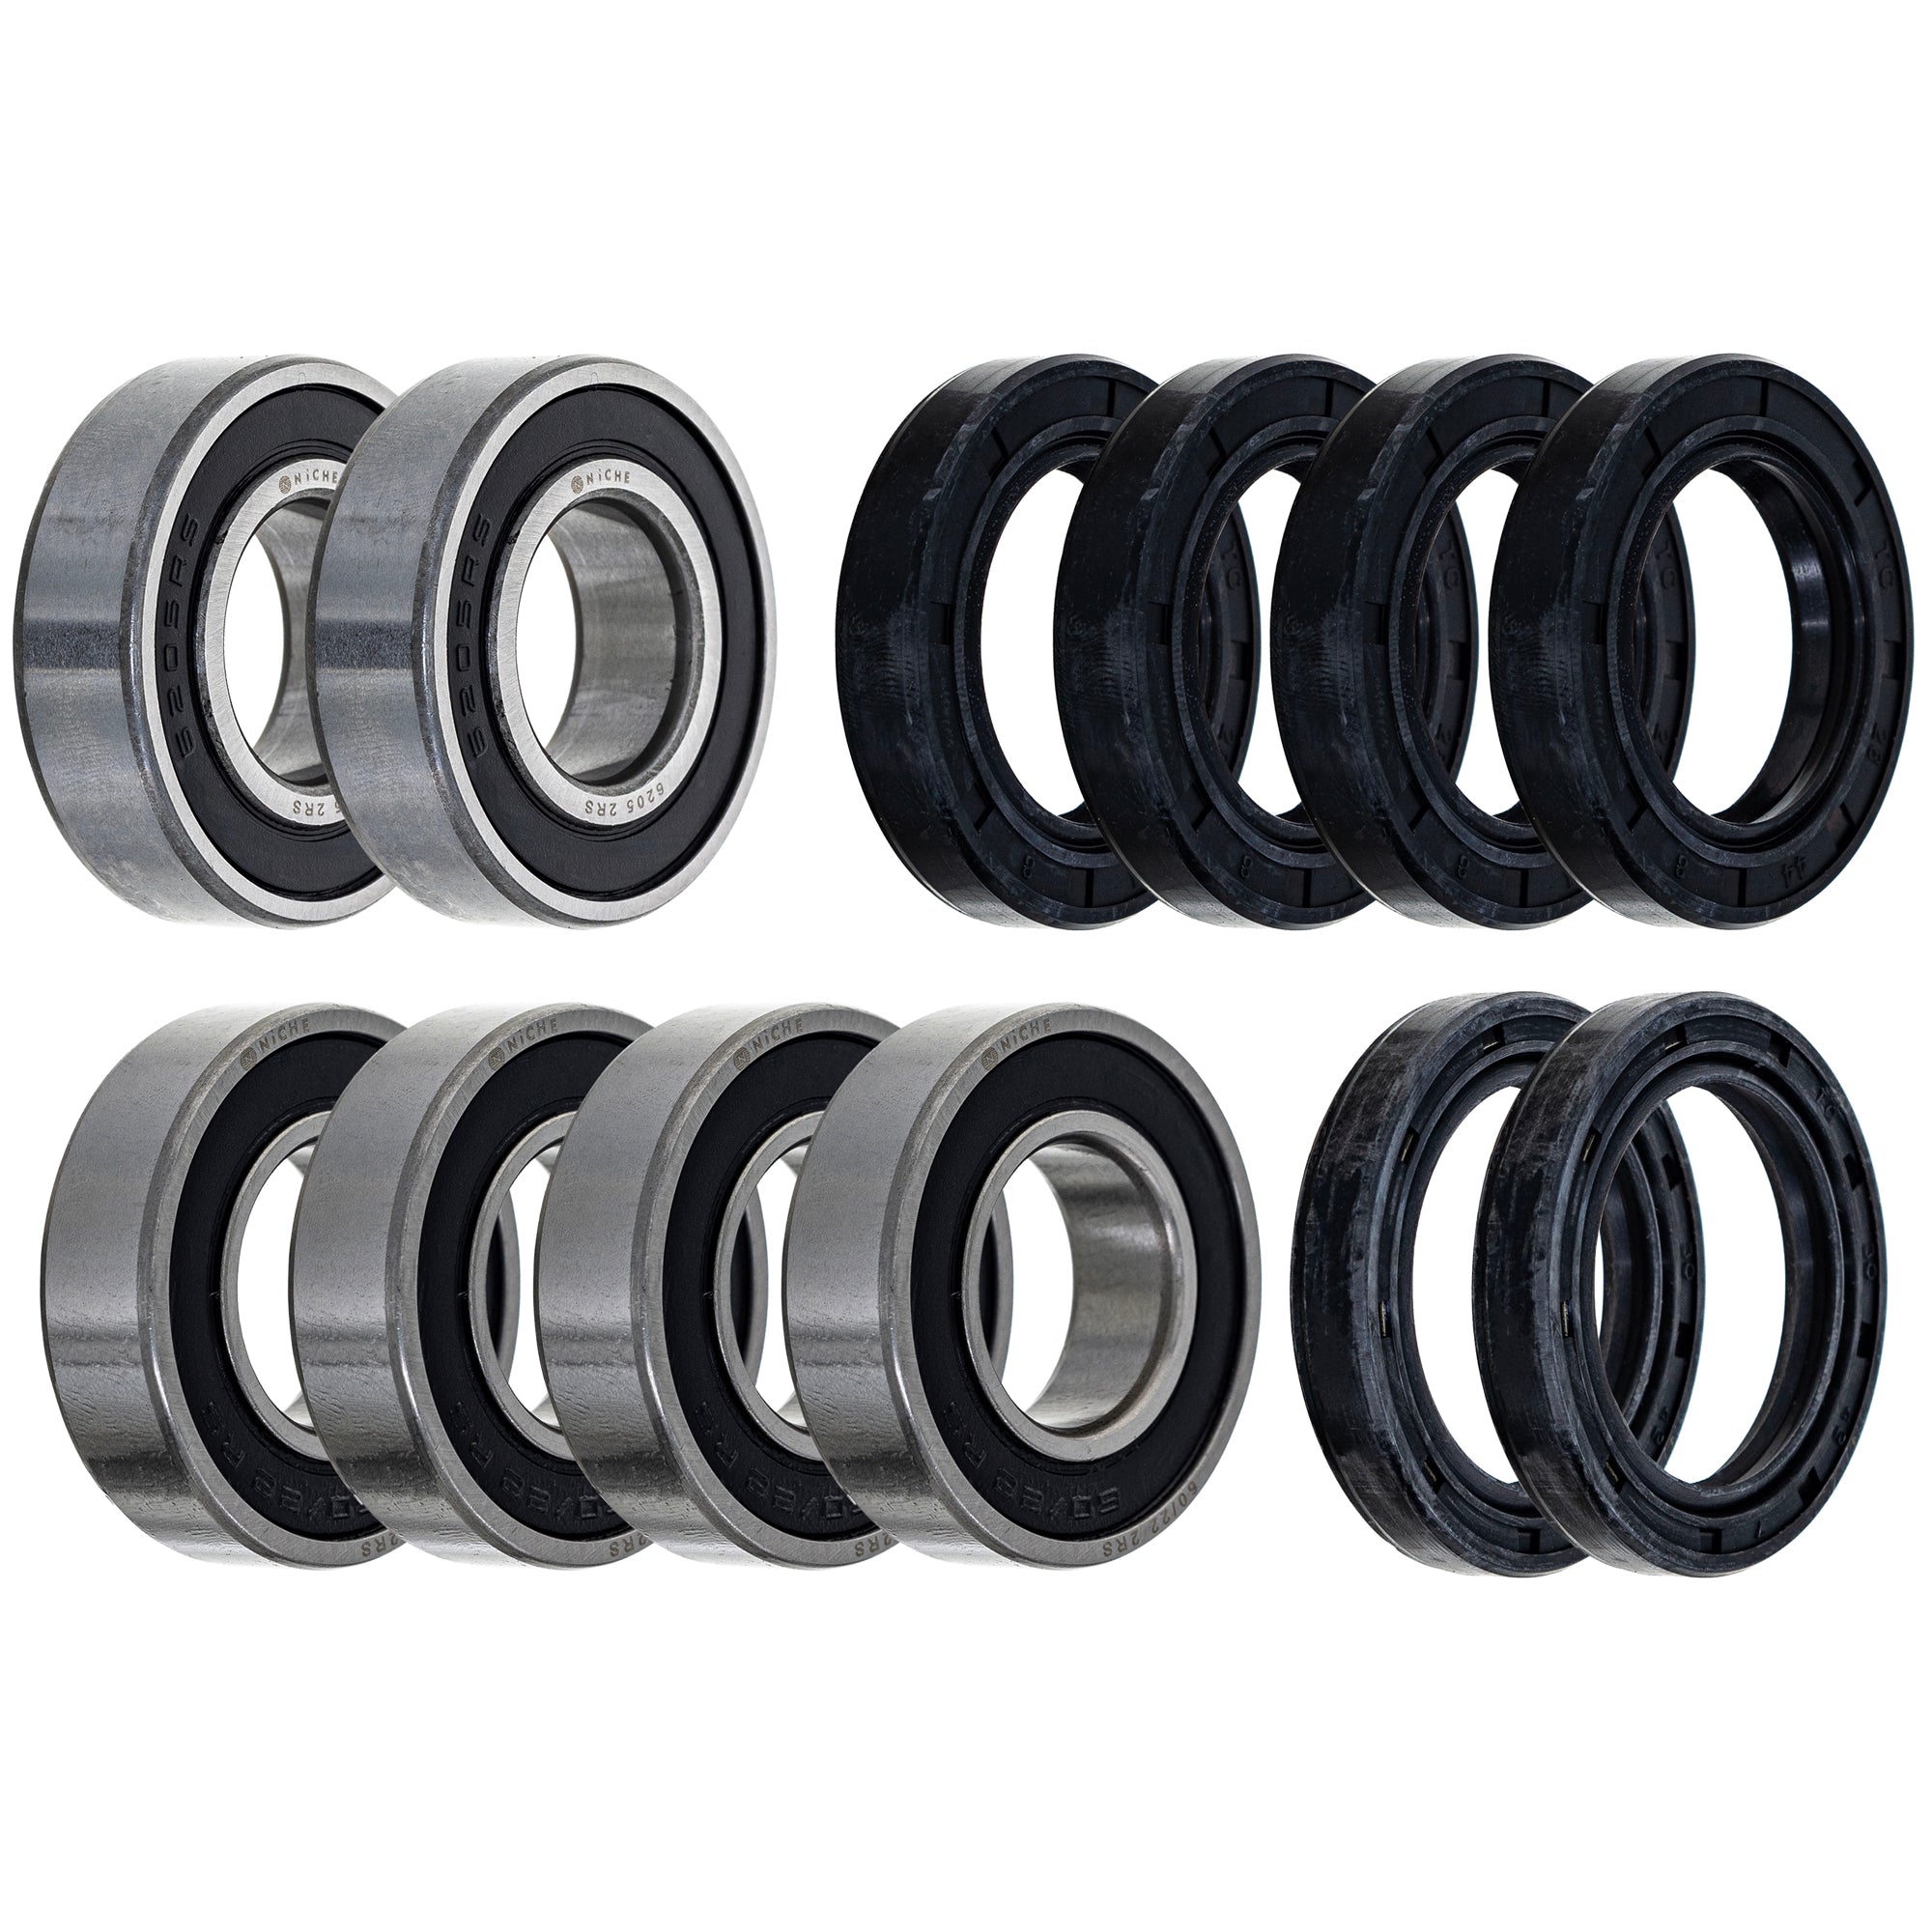 Wheel Bearing Seal Kit for zOTHER Ref No Mule NICHE MK1008391